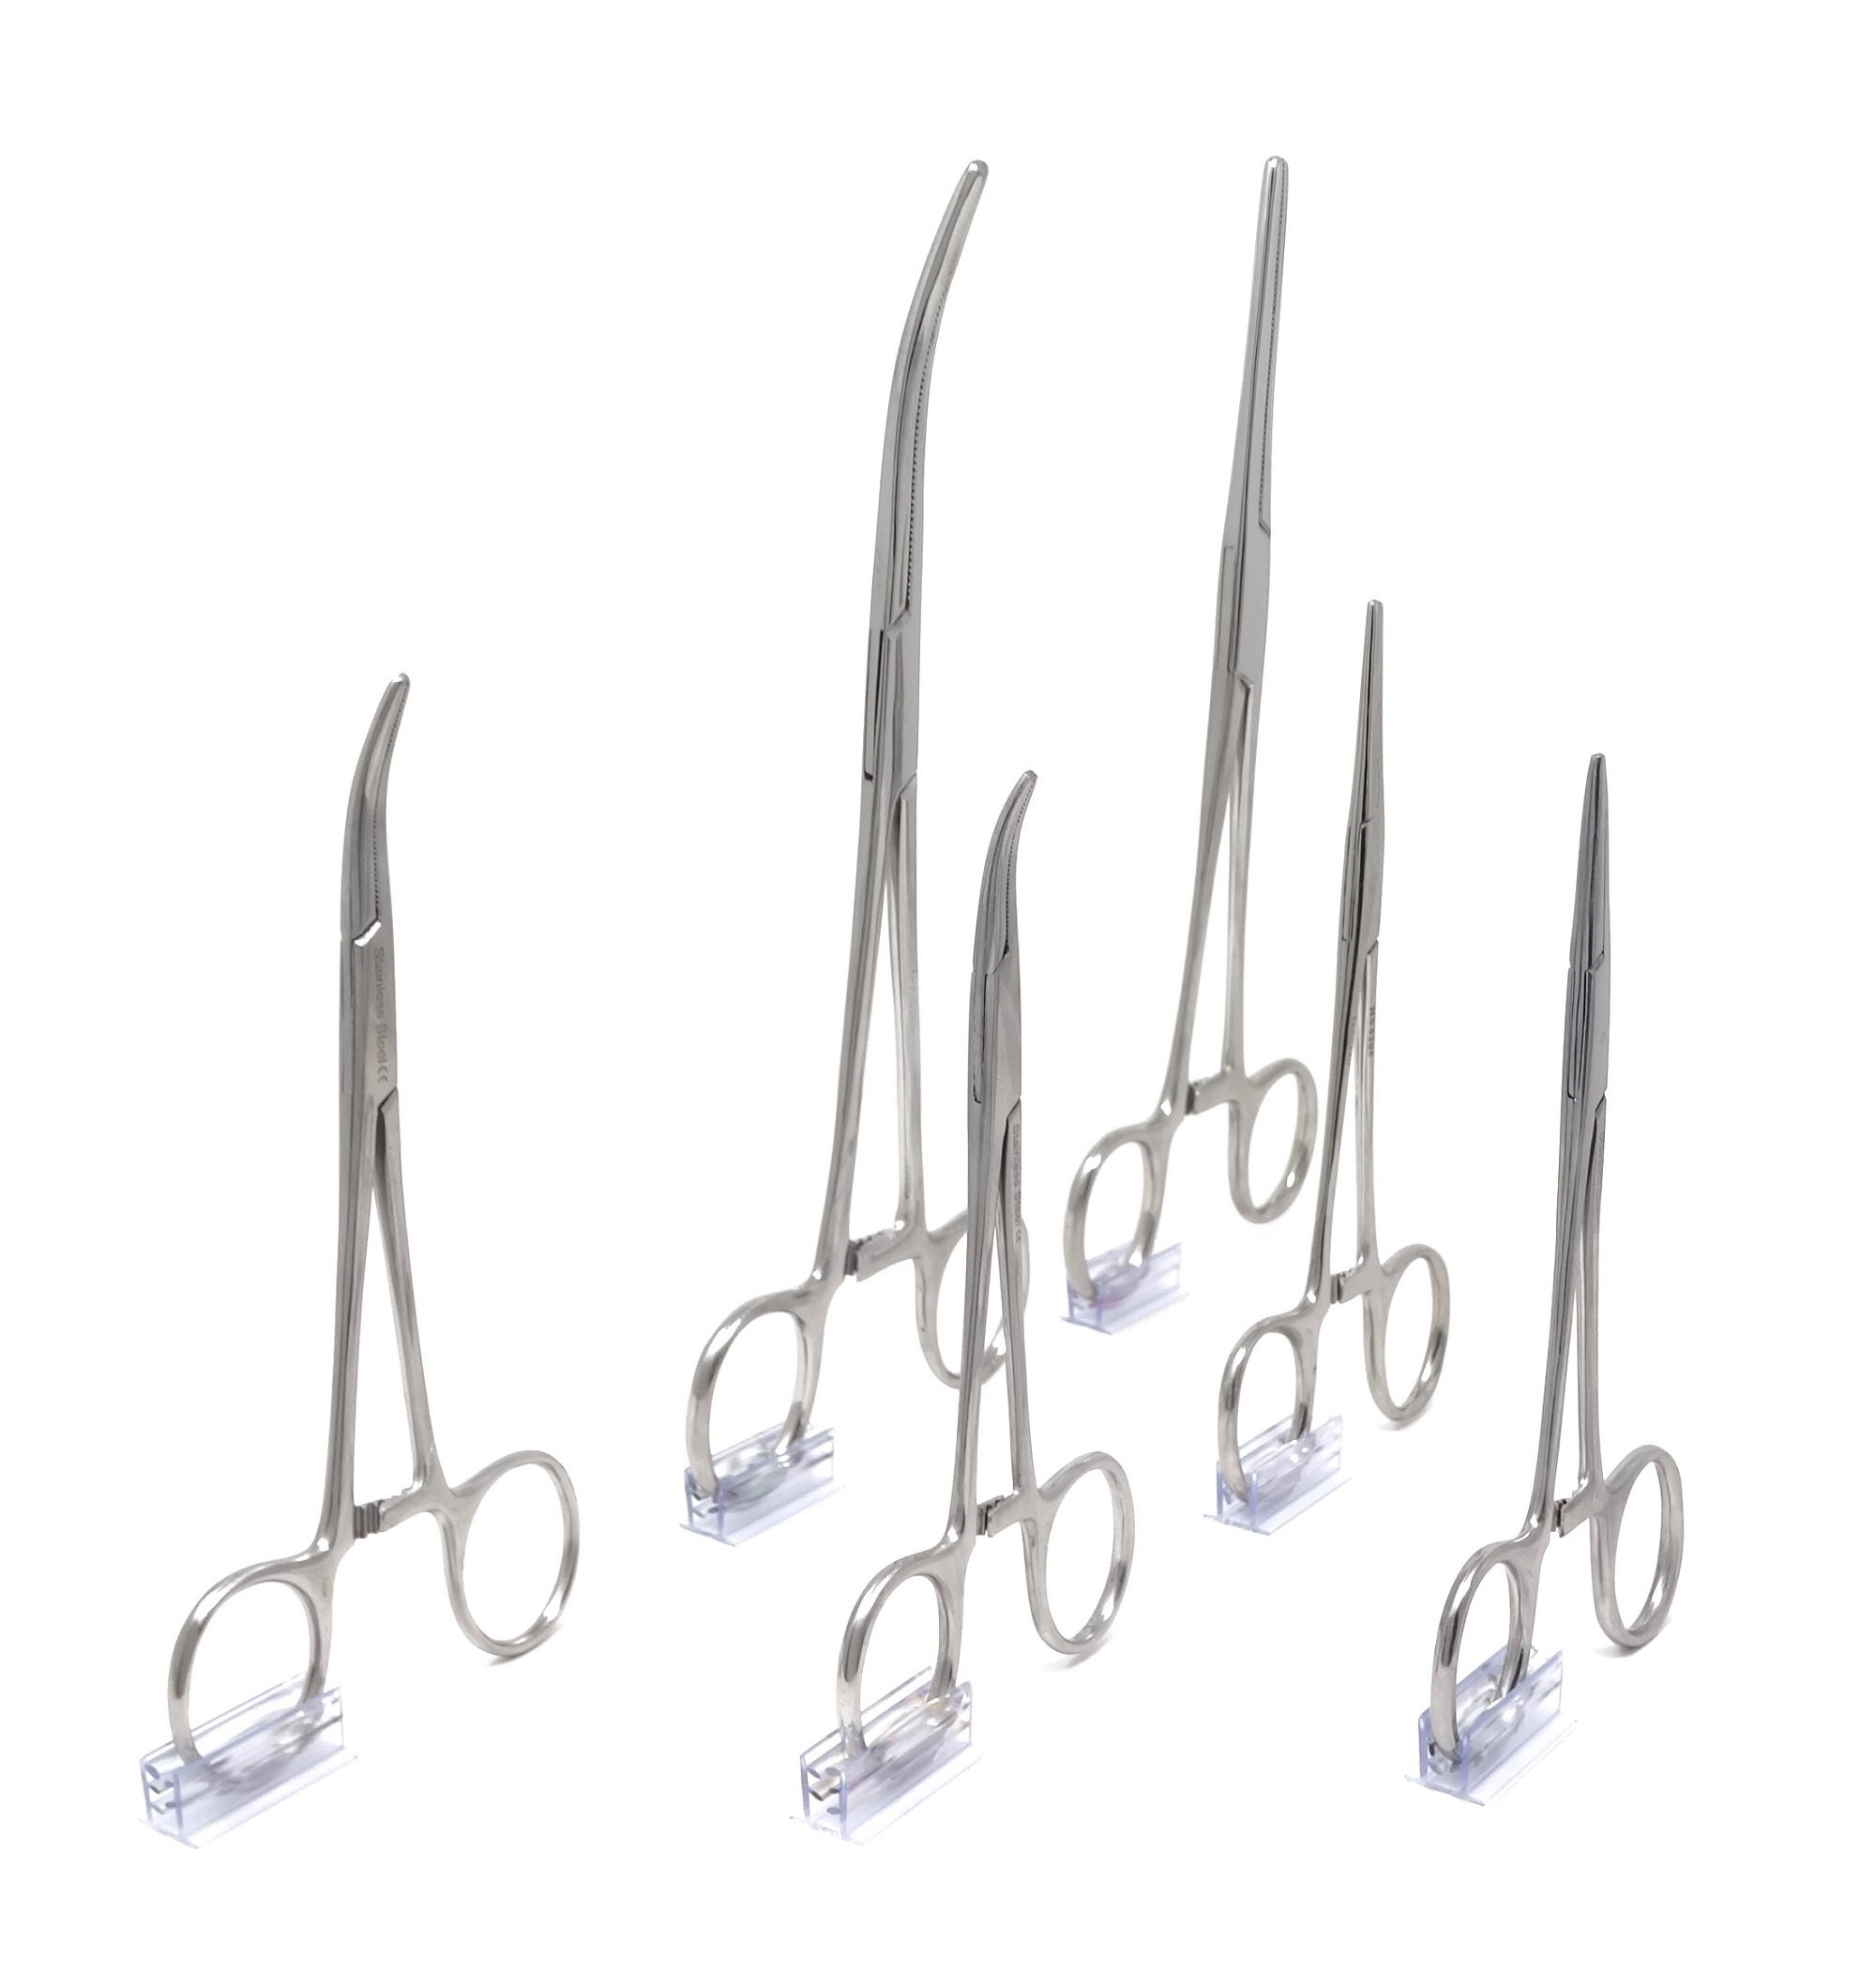 Fishing 18 Curved Hemostat Forceps Locking Clamps - Stainless Steel